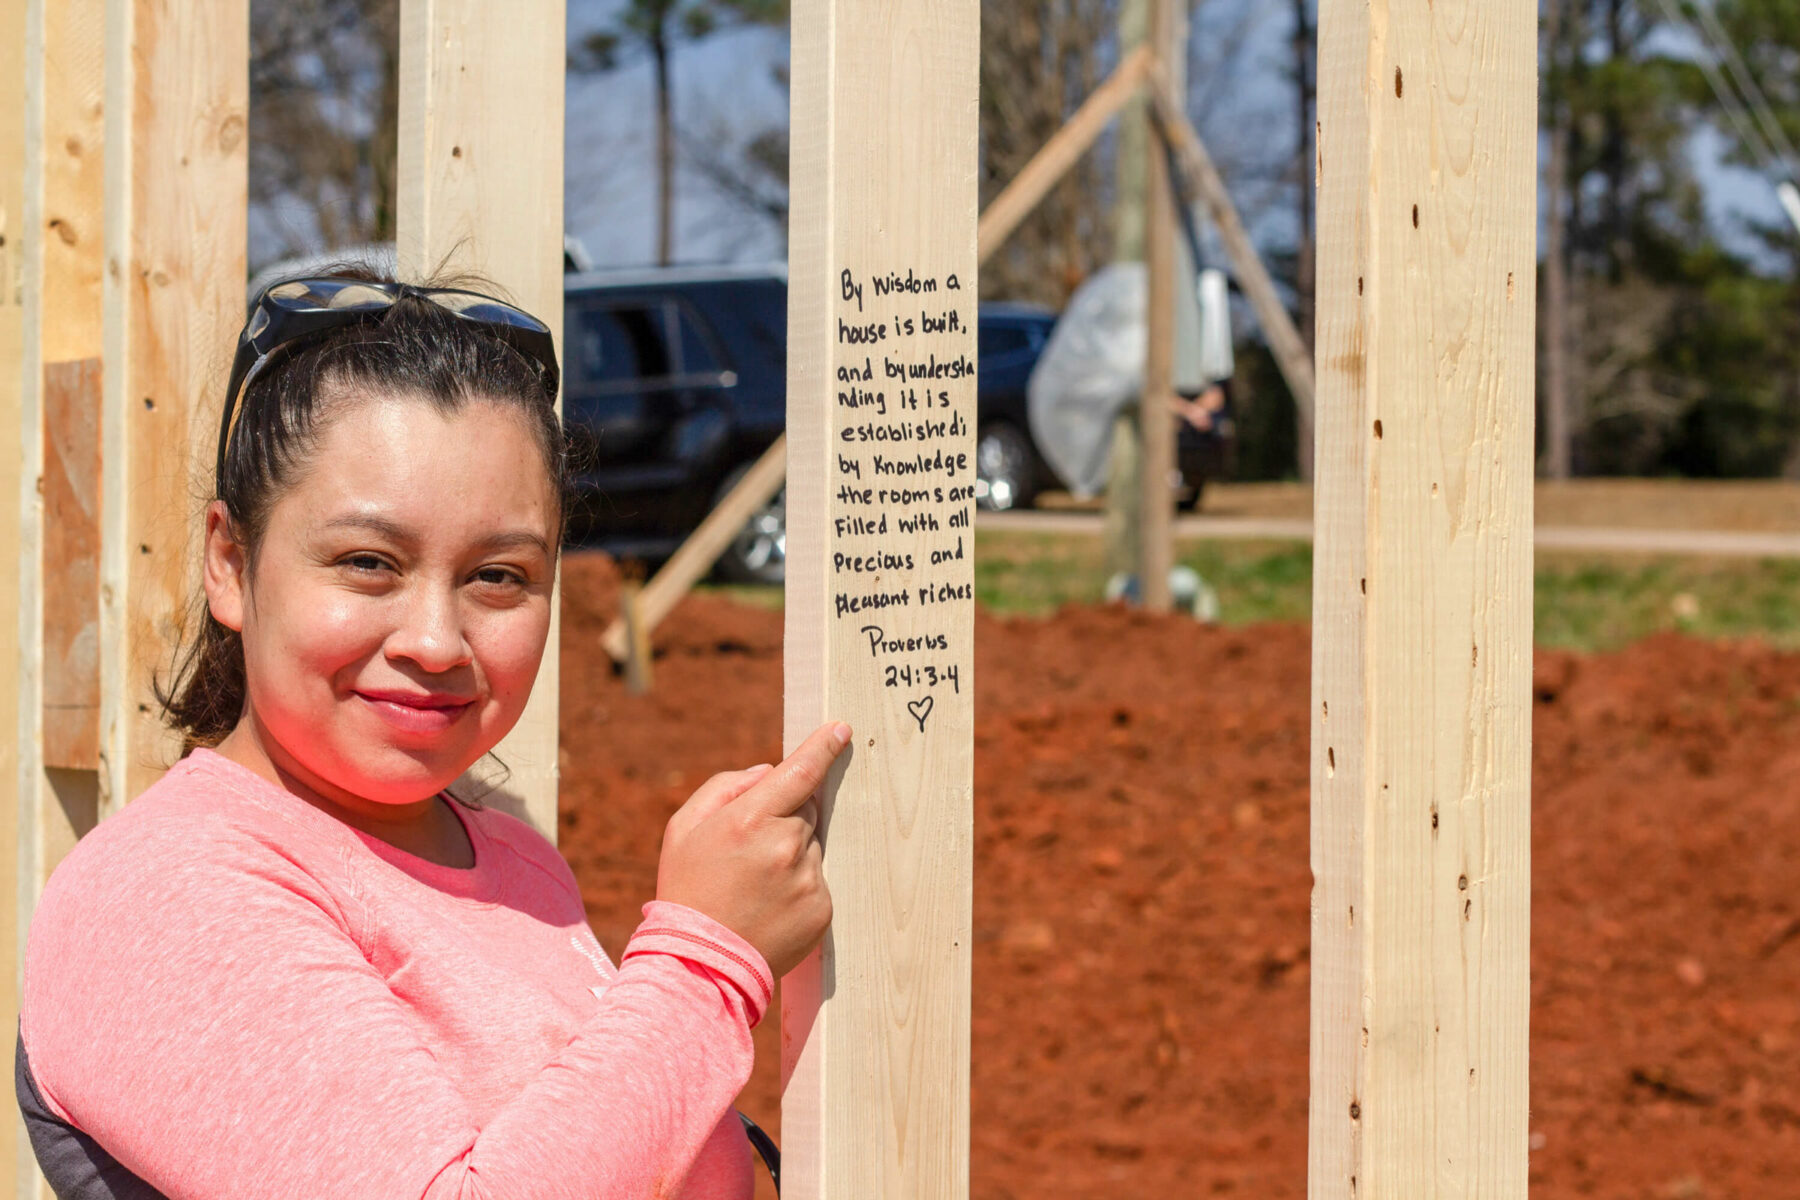 Habitat Homeowner pointing to a message written on one of the studs of her home.